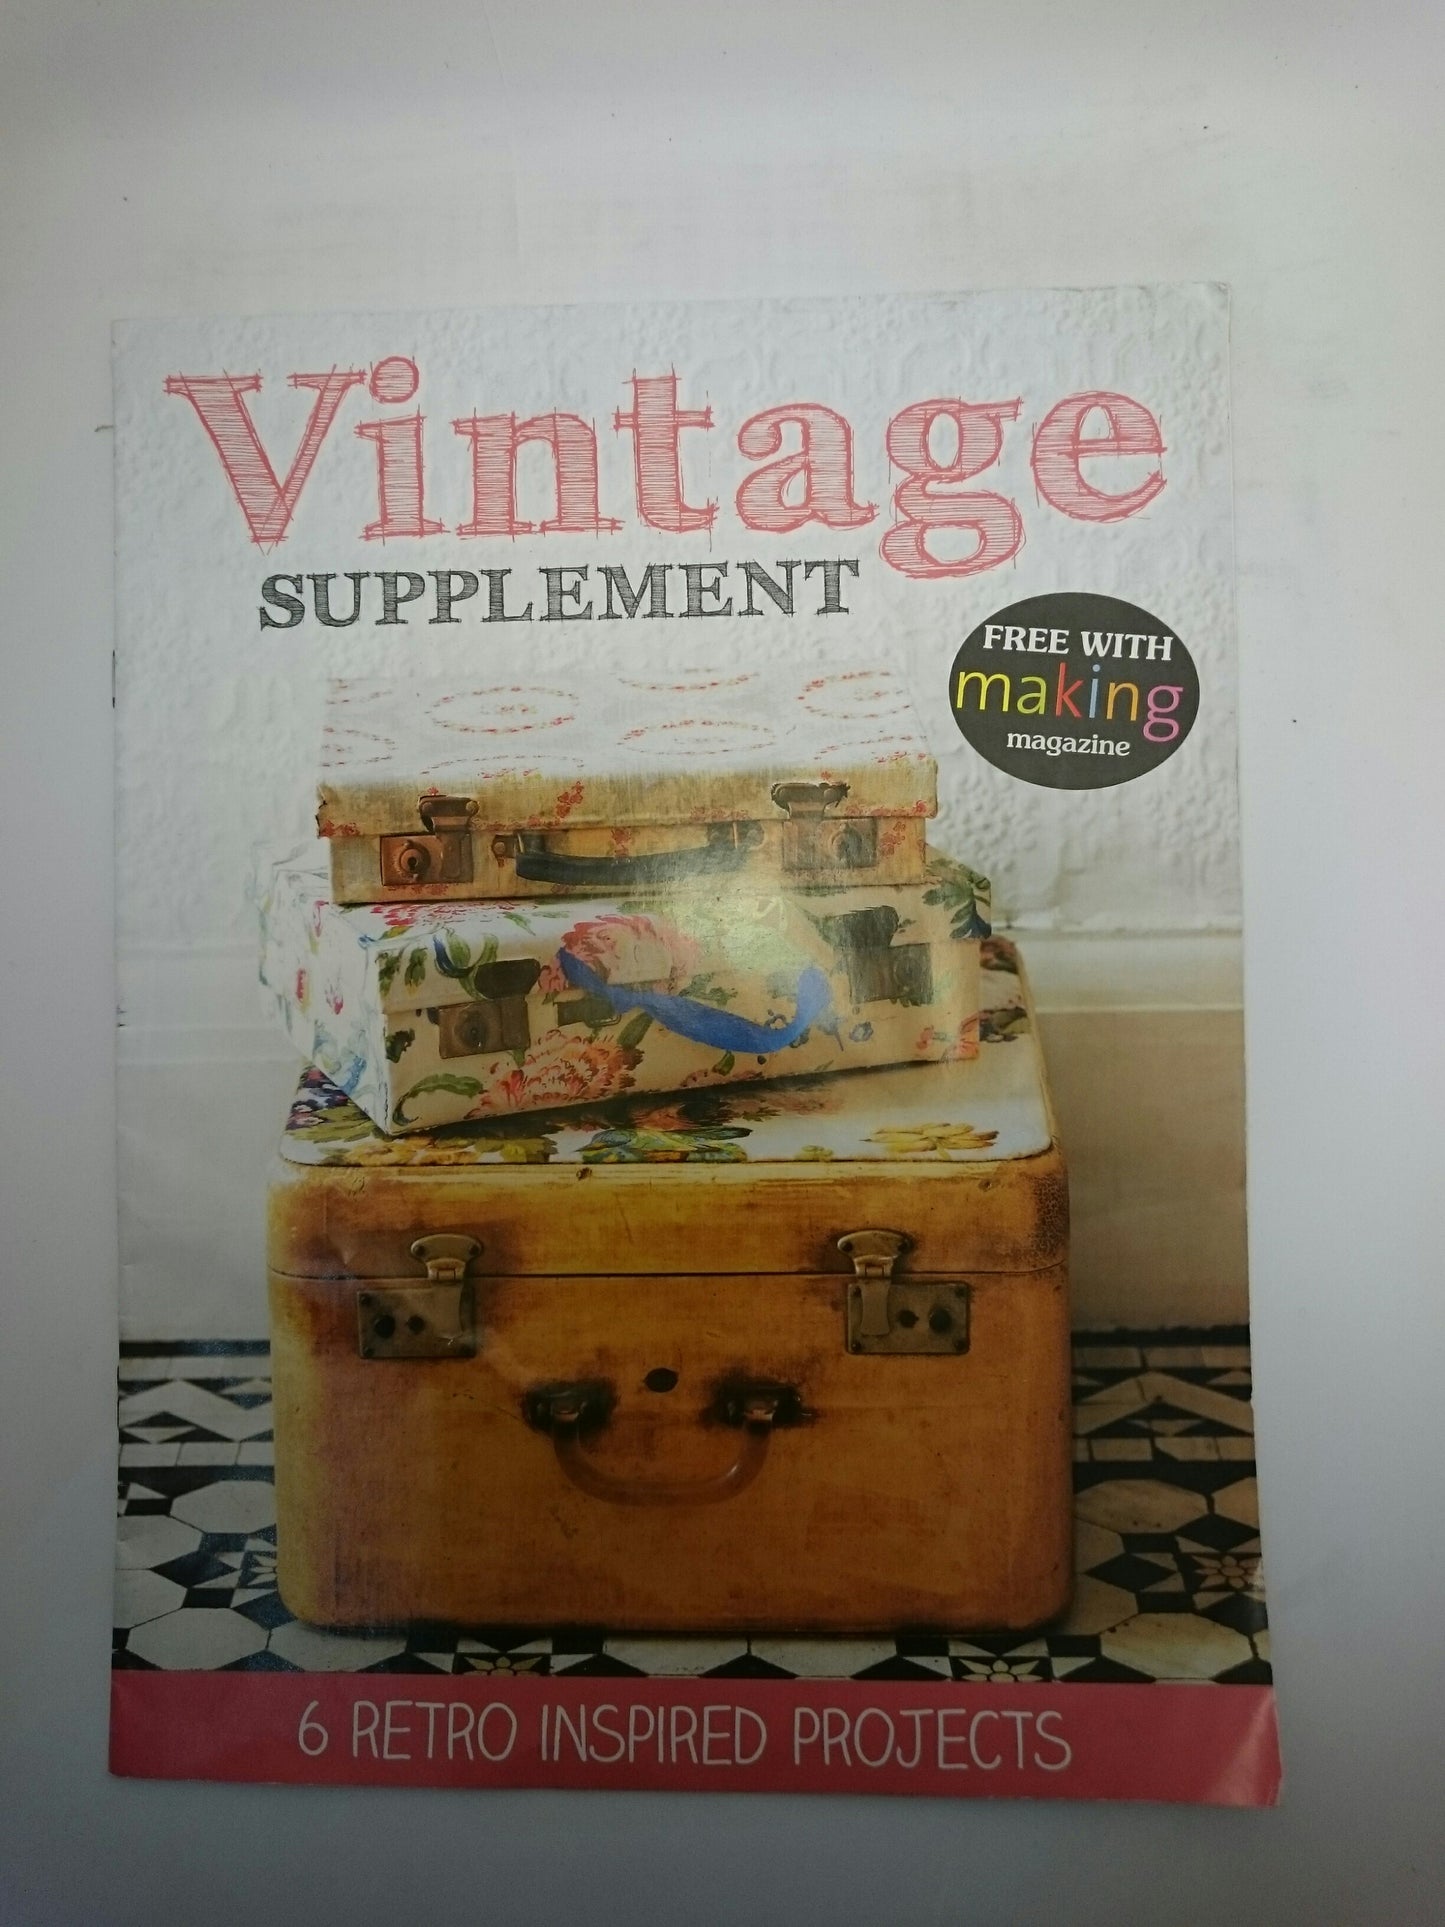 Vintage supplement 6 retro inspired projects